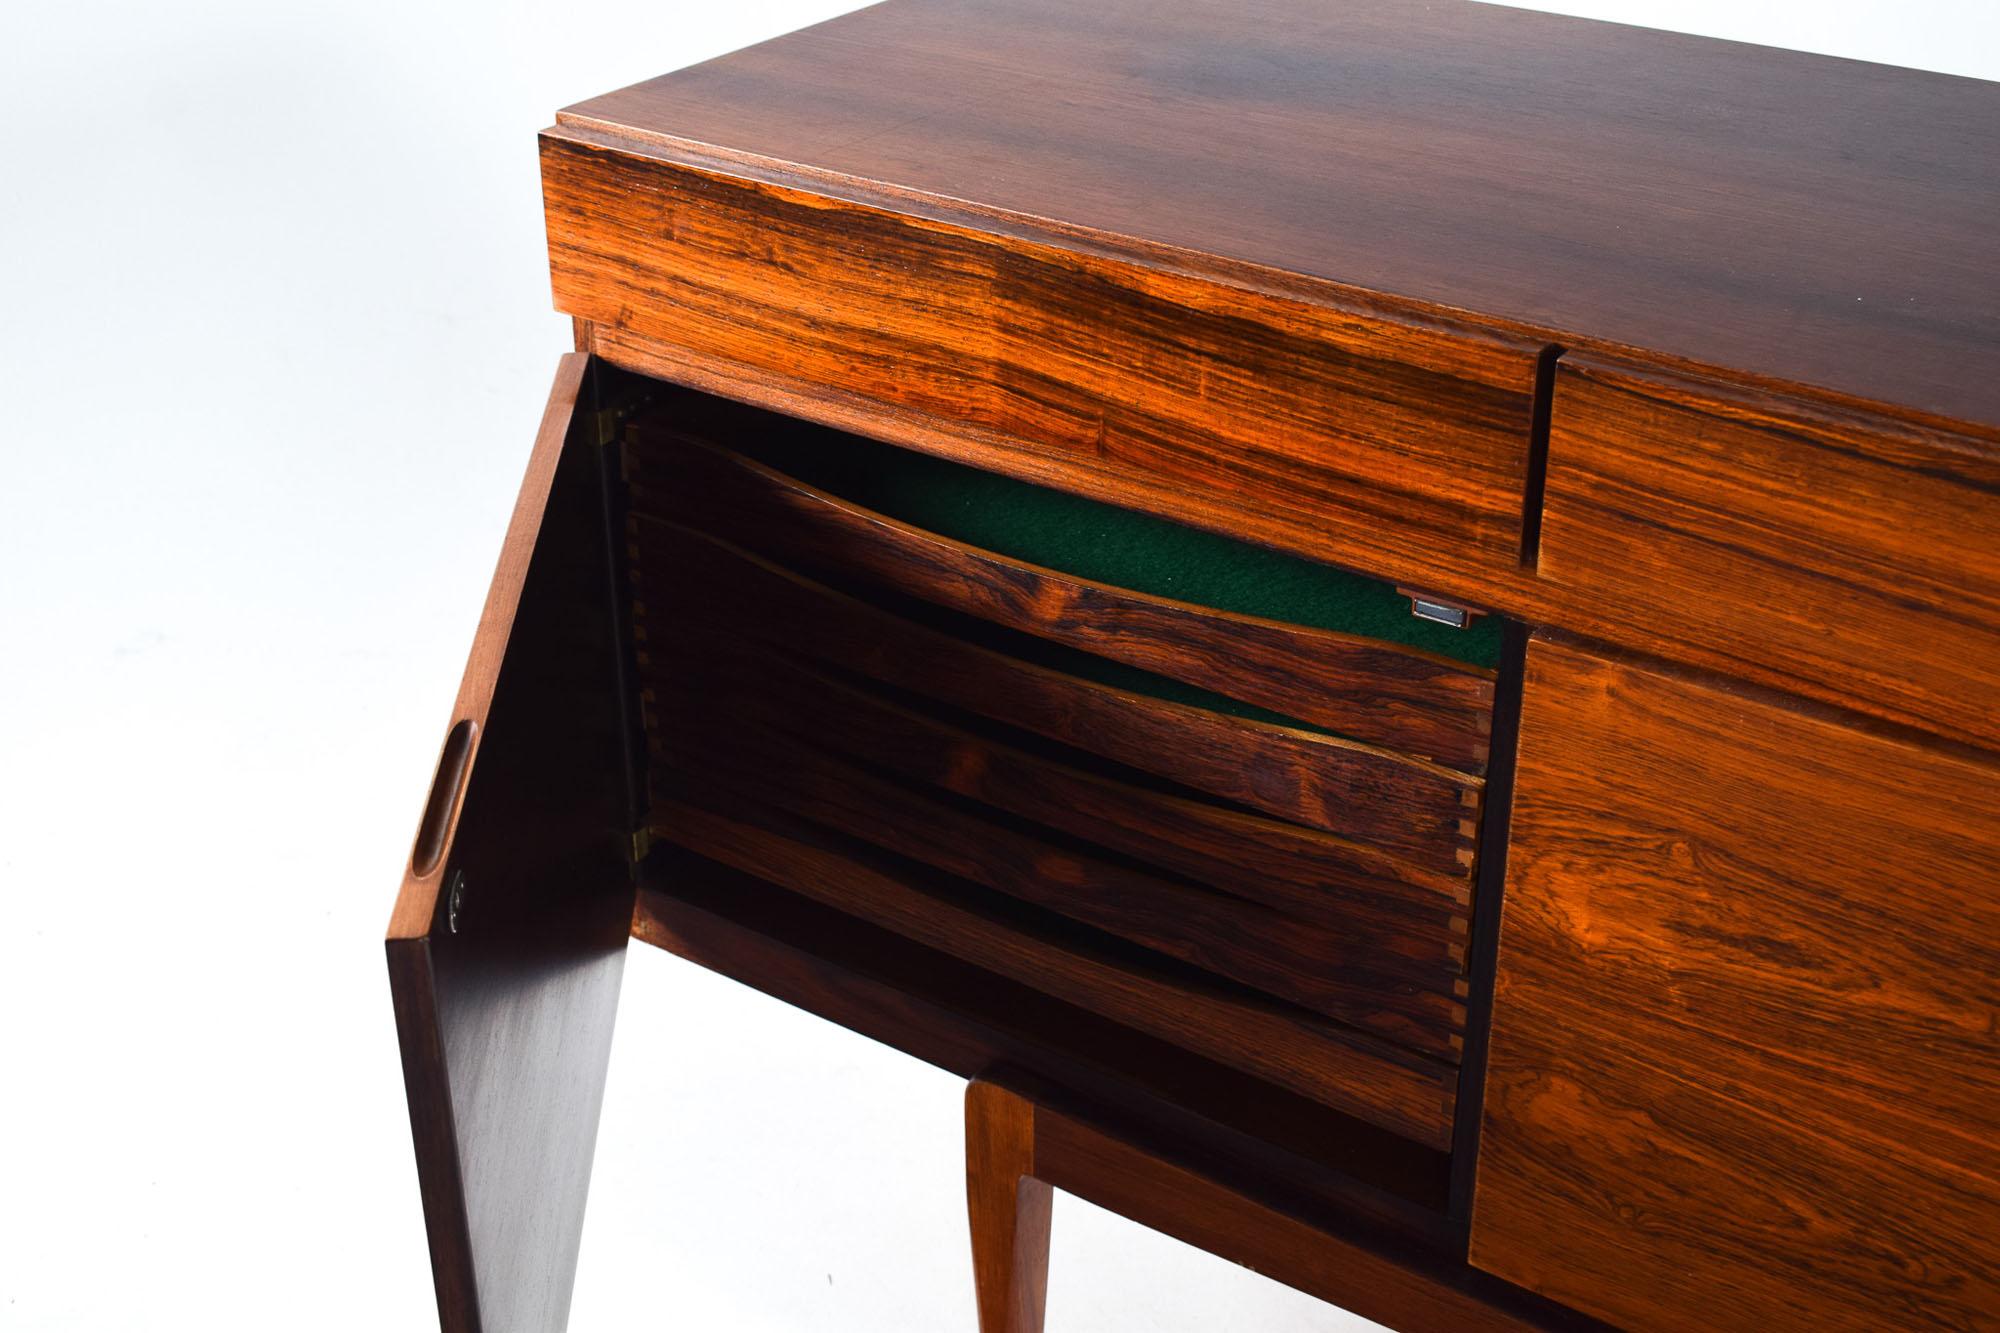 Stunning rosewood sideboard model FA66, designed by Ib Kofod-Larsen and manufactured in Denmark in the 1960s. This clean-lined sideboard features beautifully rosewood. The case sits on a raised base and offers four drawers above a four-door cabinet.